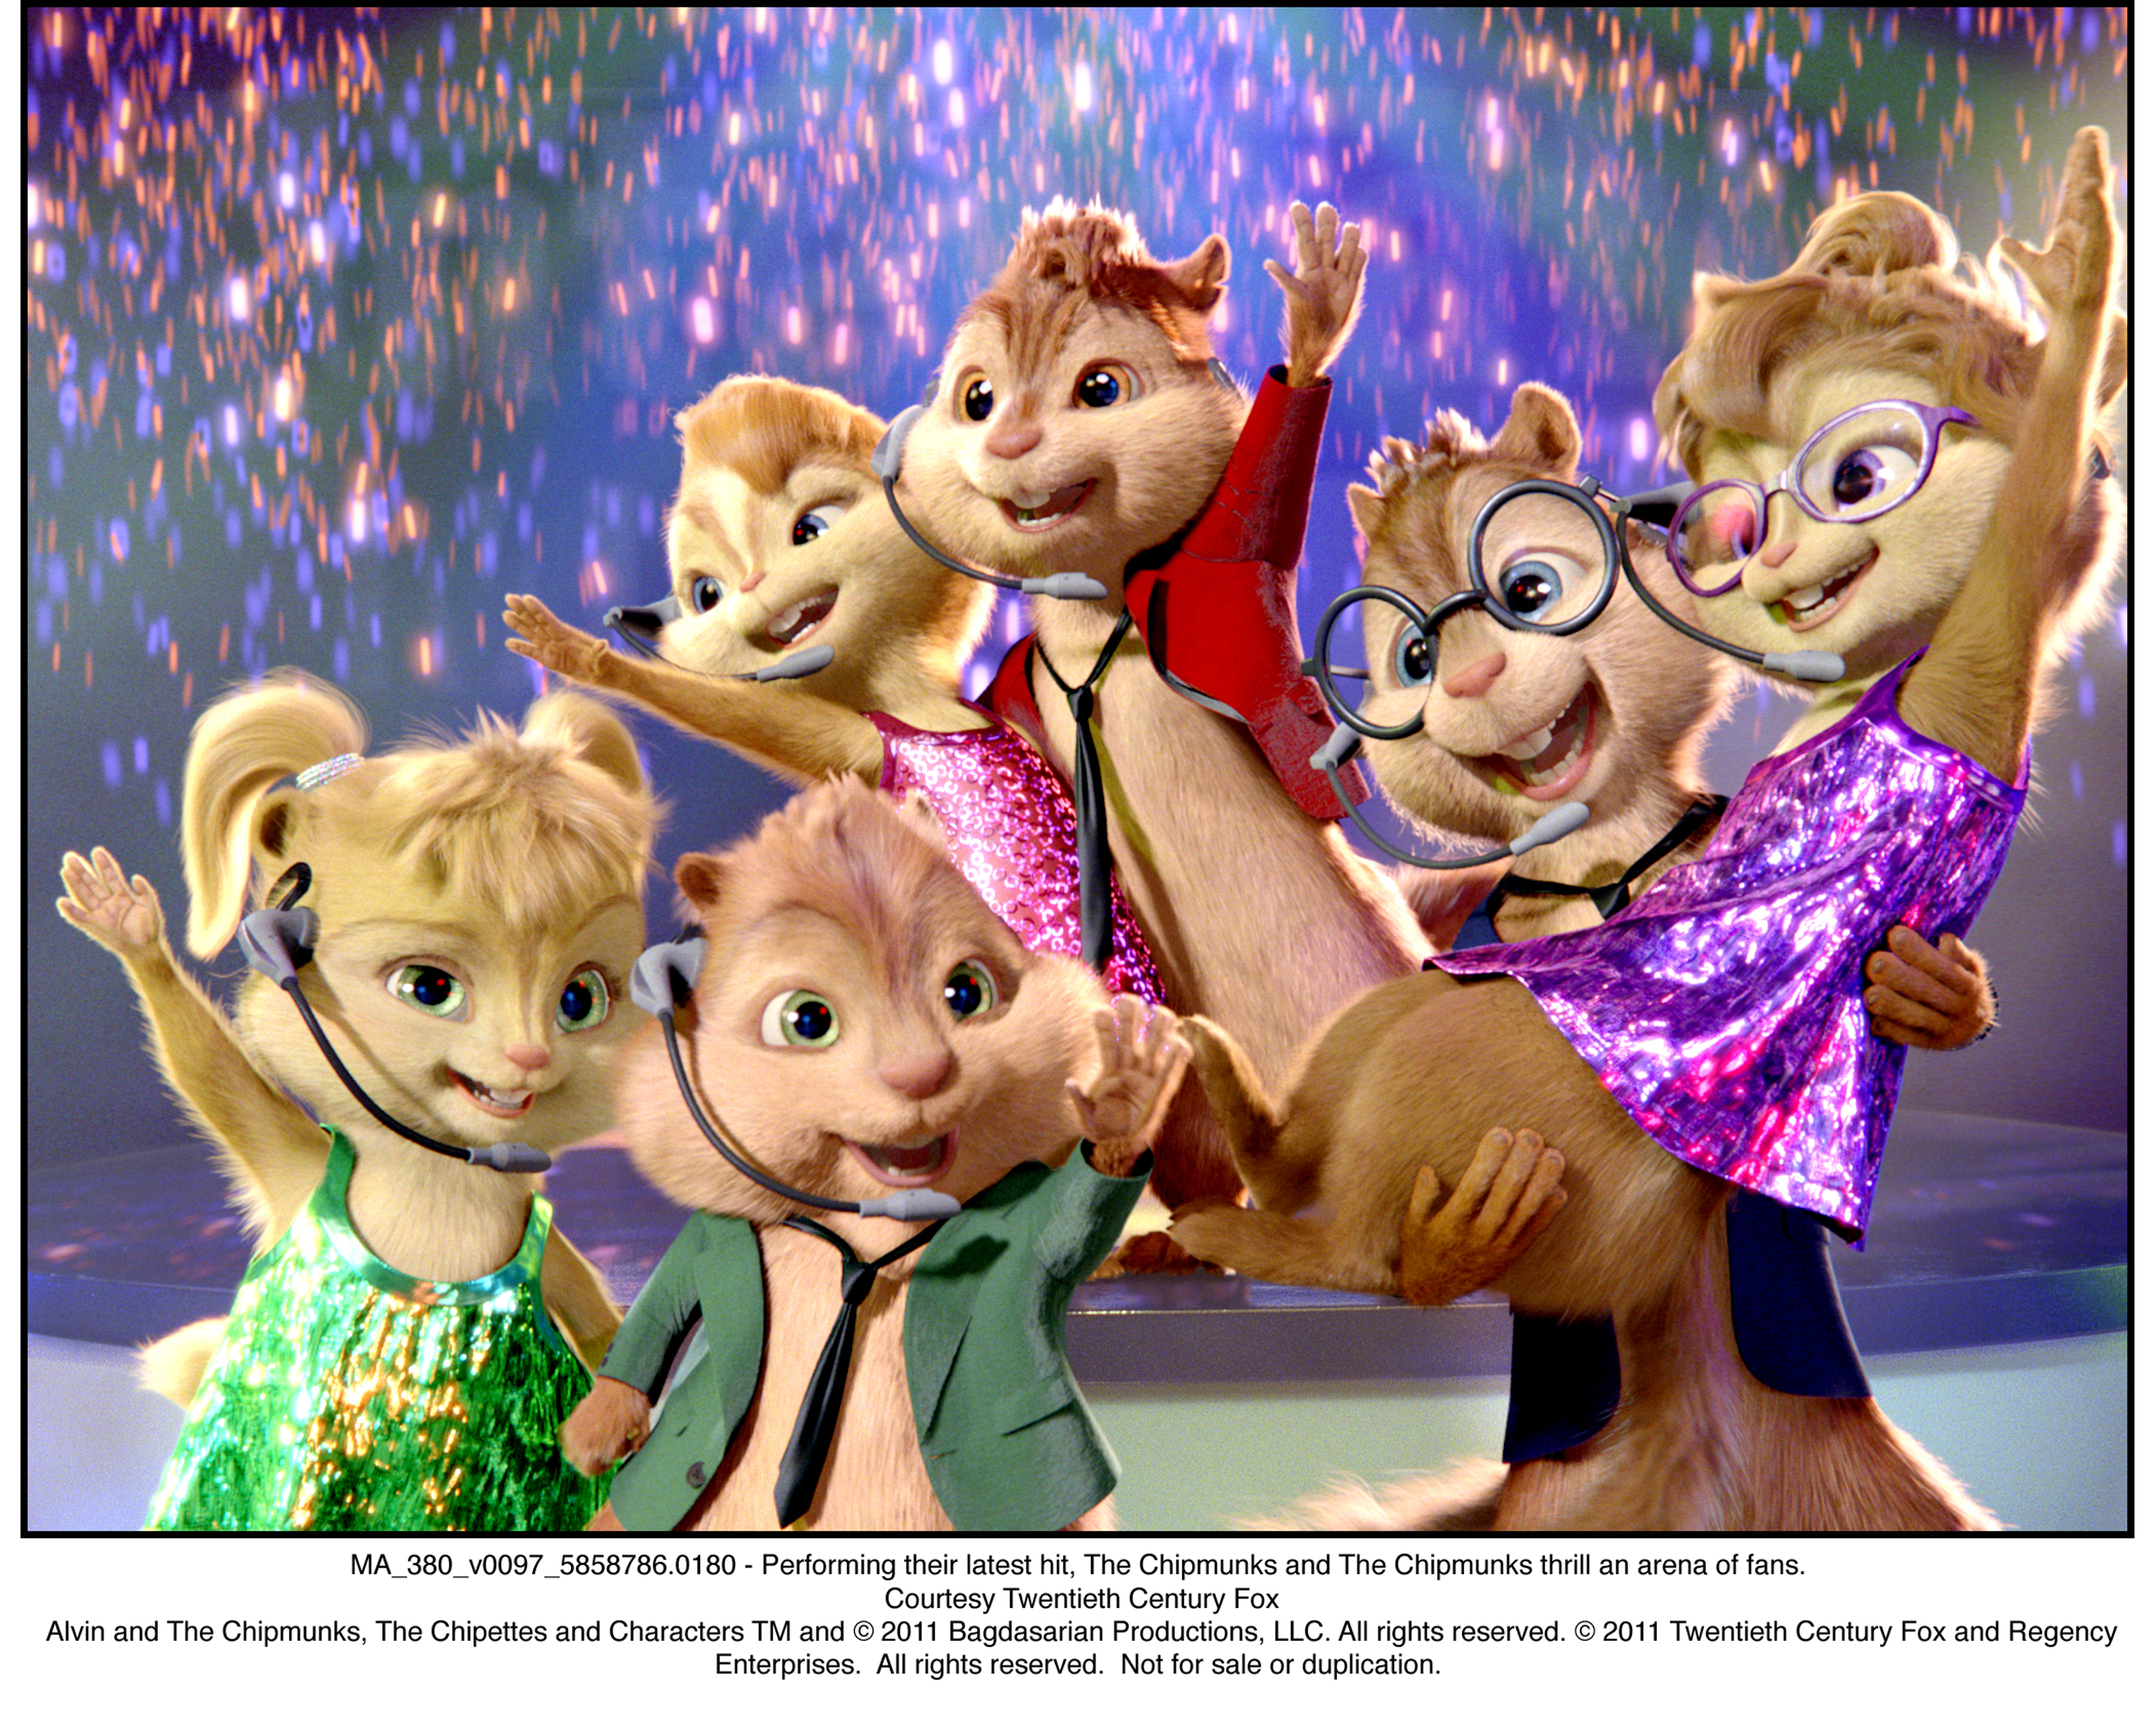 ‘ALVIN AND THE CHIPMUNKS’ AND ‘RIO’ FILMS COME TO LIFE ON STAGE! 1  Twentieth Century Fox Consumer Products and Iconic Entertainment Partner for Two New Live Entertainment Shows Touring Worldwide in 2015 and 2016